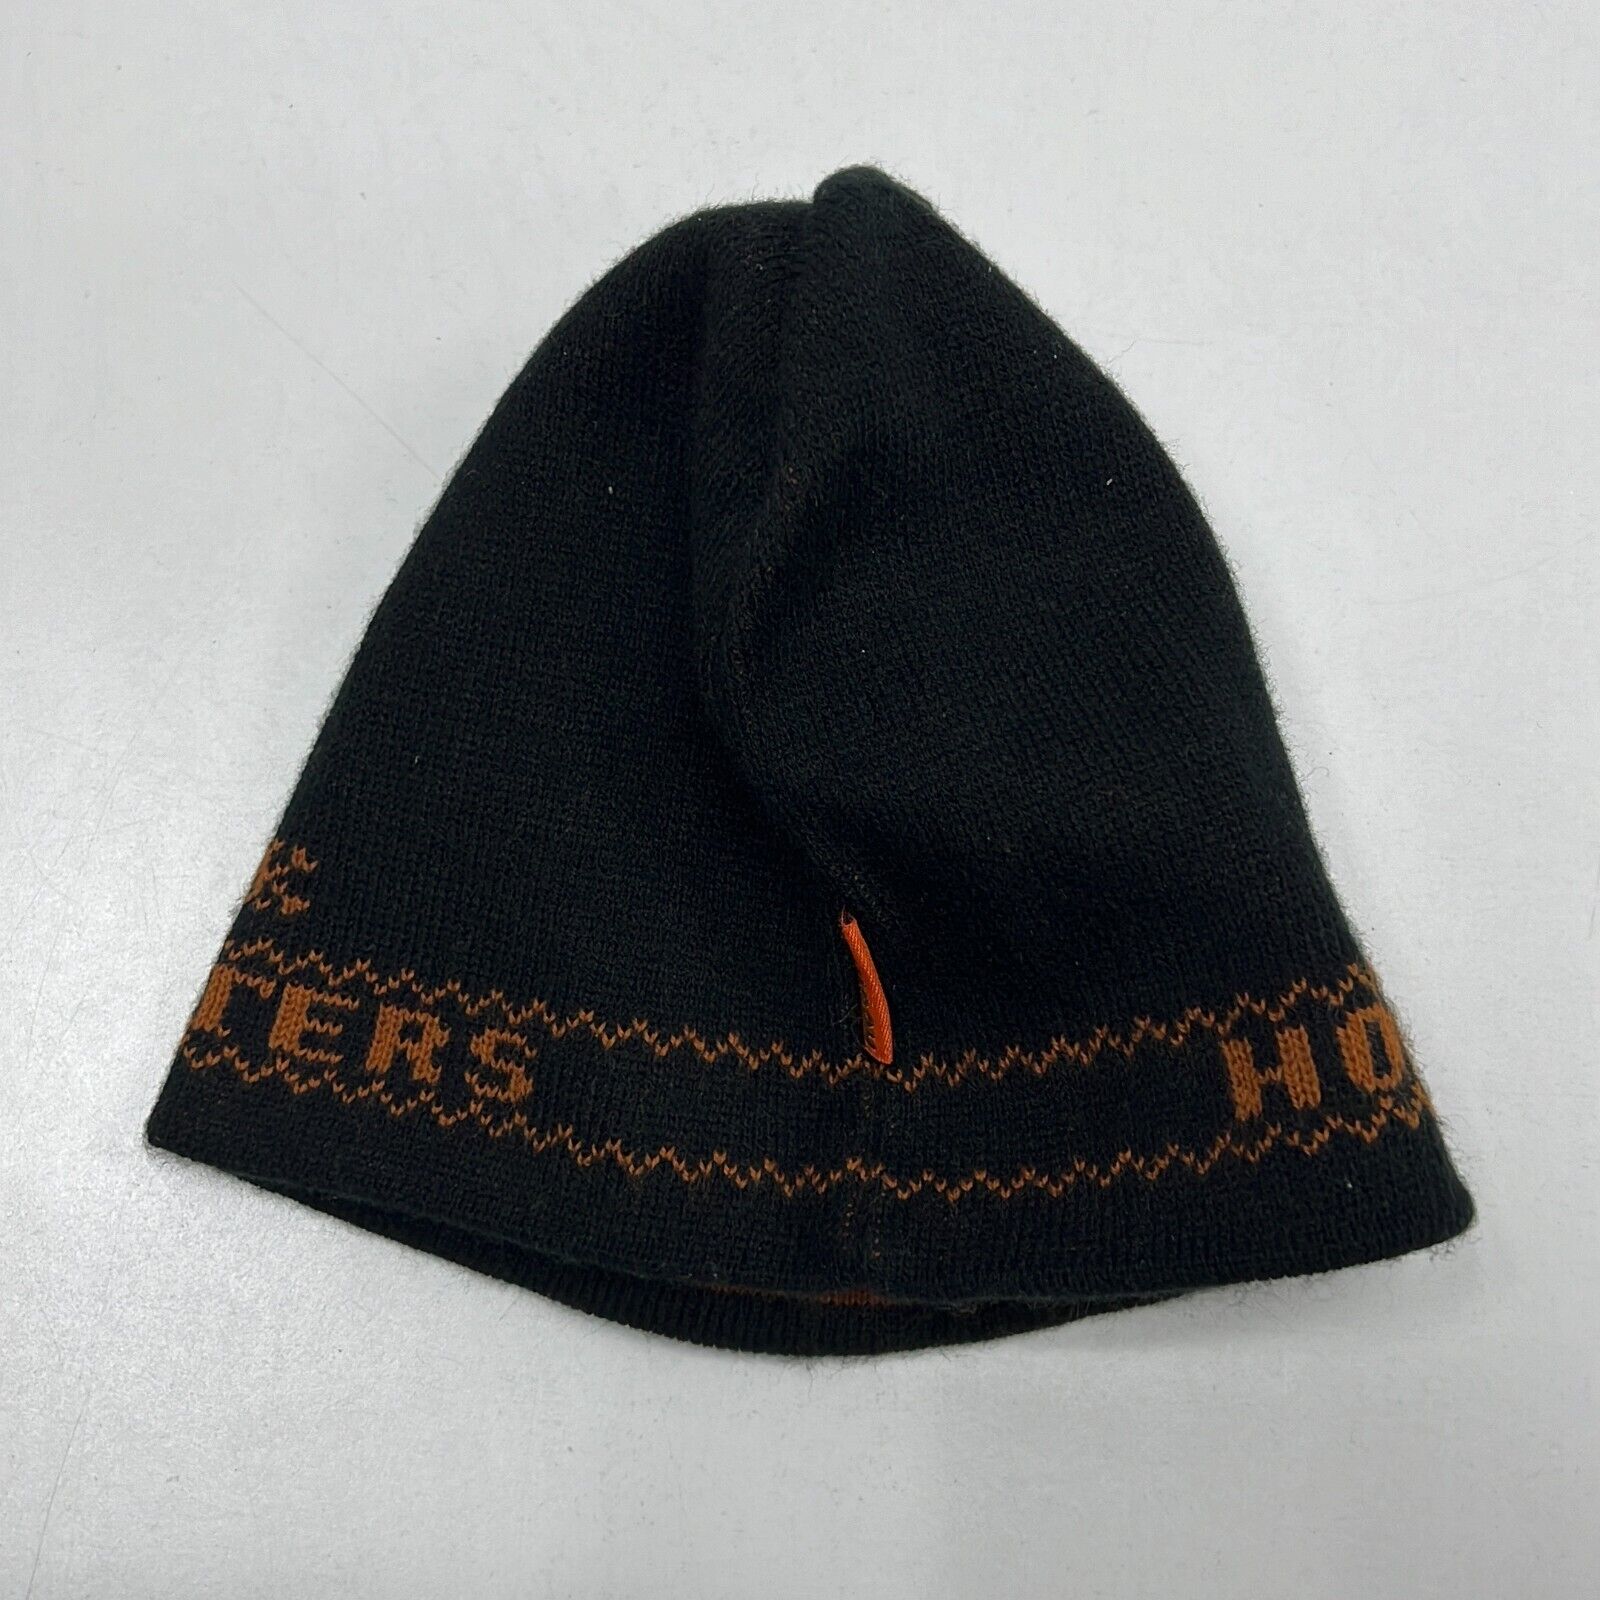 Hooters Men's Brown Black Embroidered Reversible Knitted Beanie Hat One Size